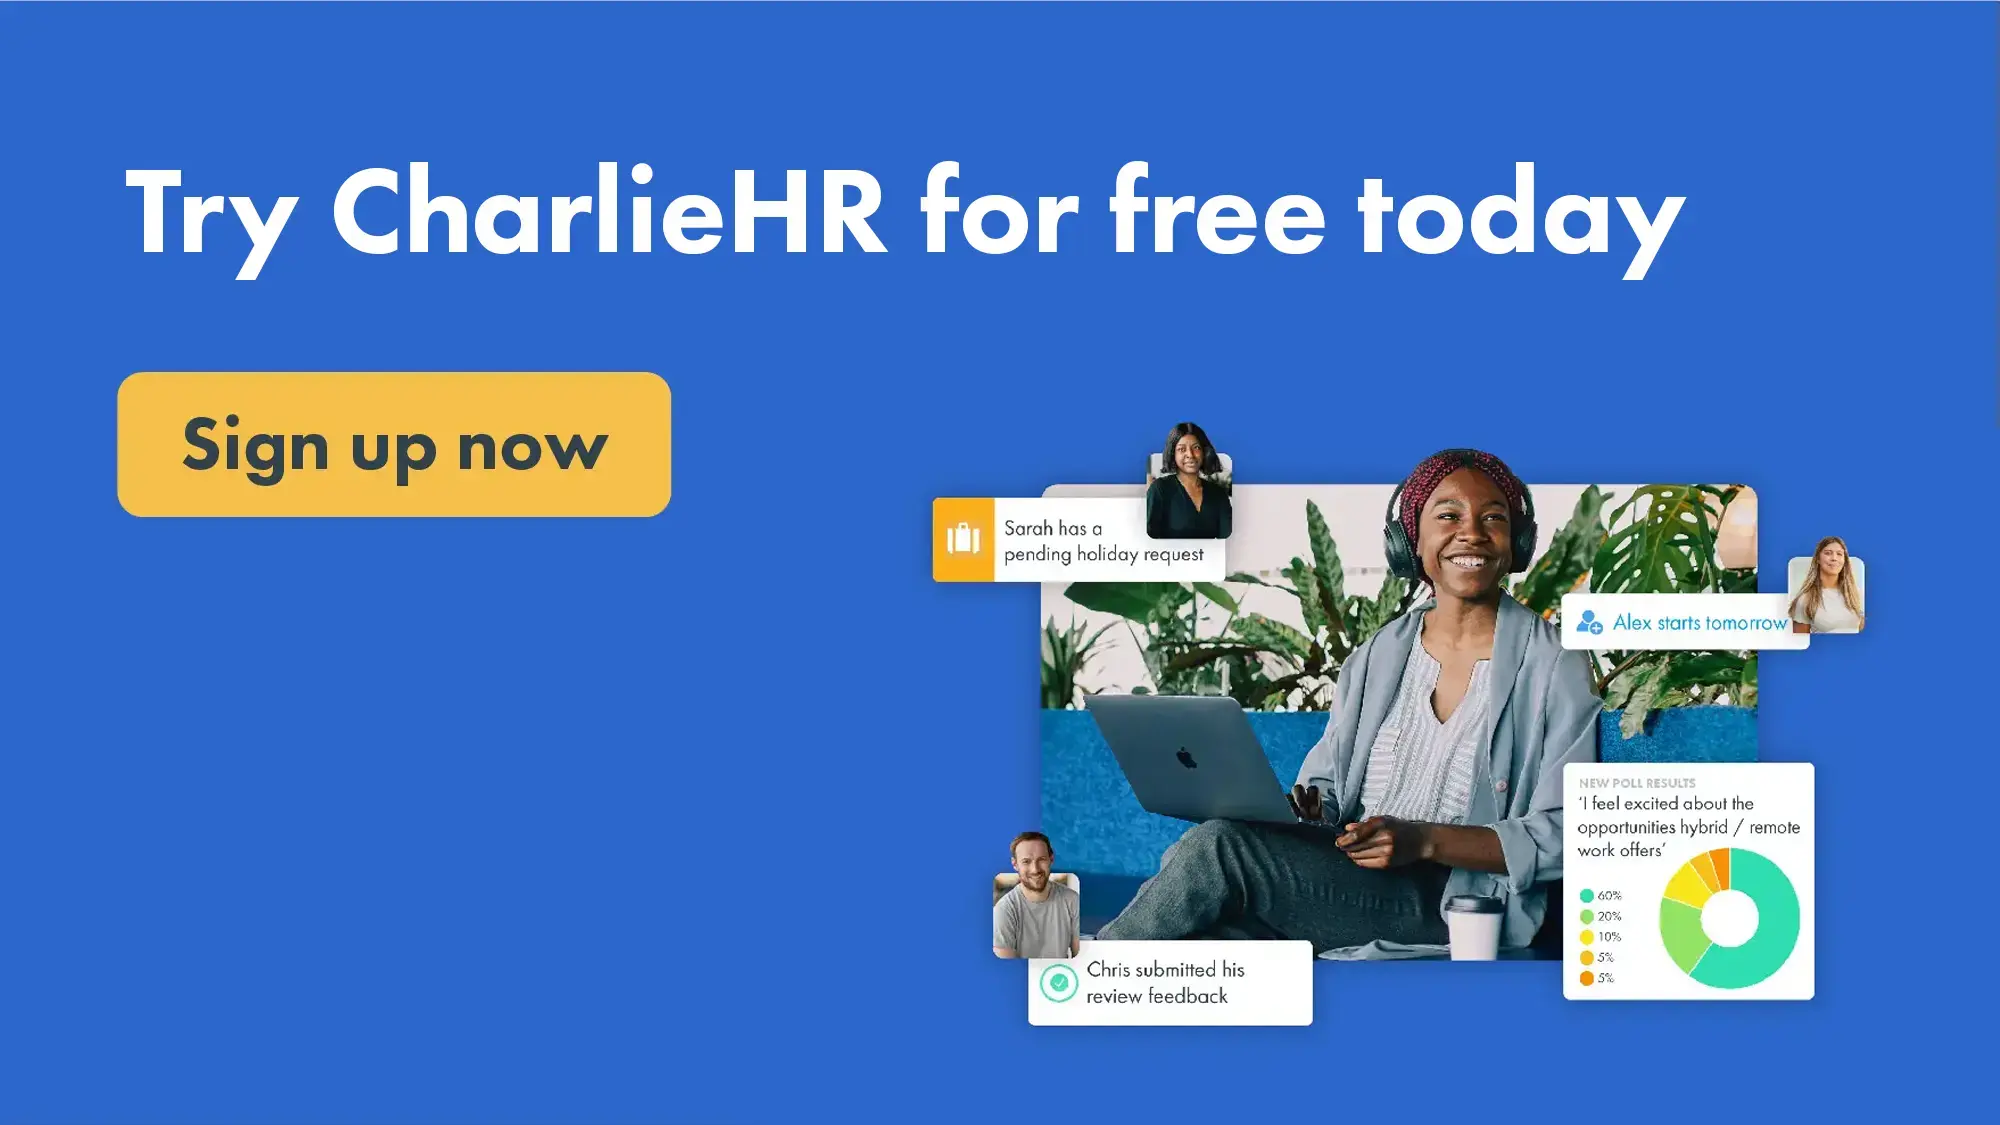 Click here to try CharlieHR for free